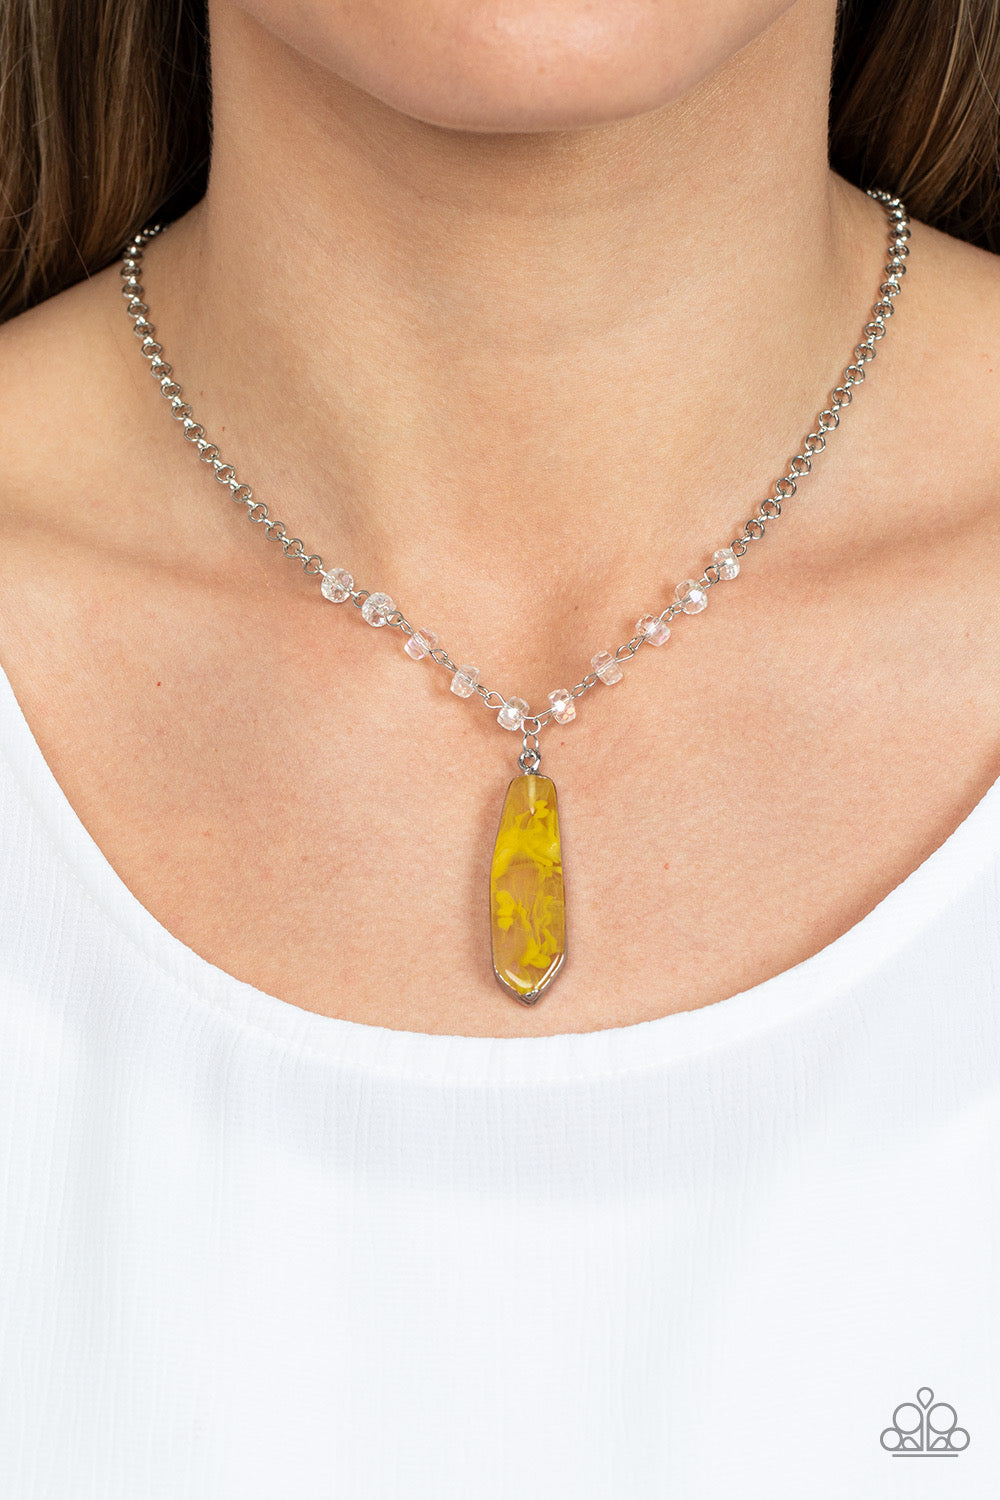 Paparazzi Magical Remedy - Yellow Necklace - A Finishing Touch Jewelry